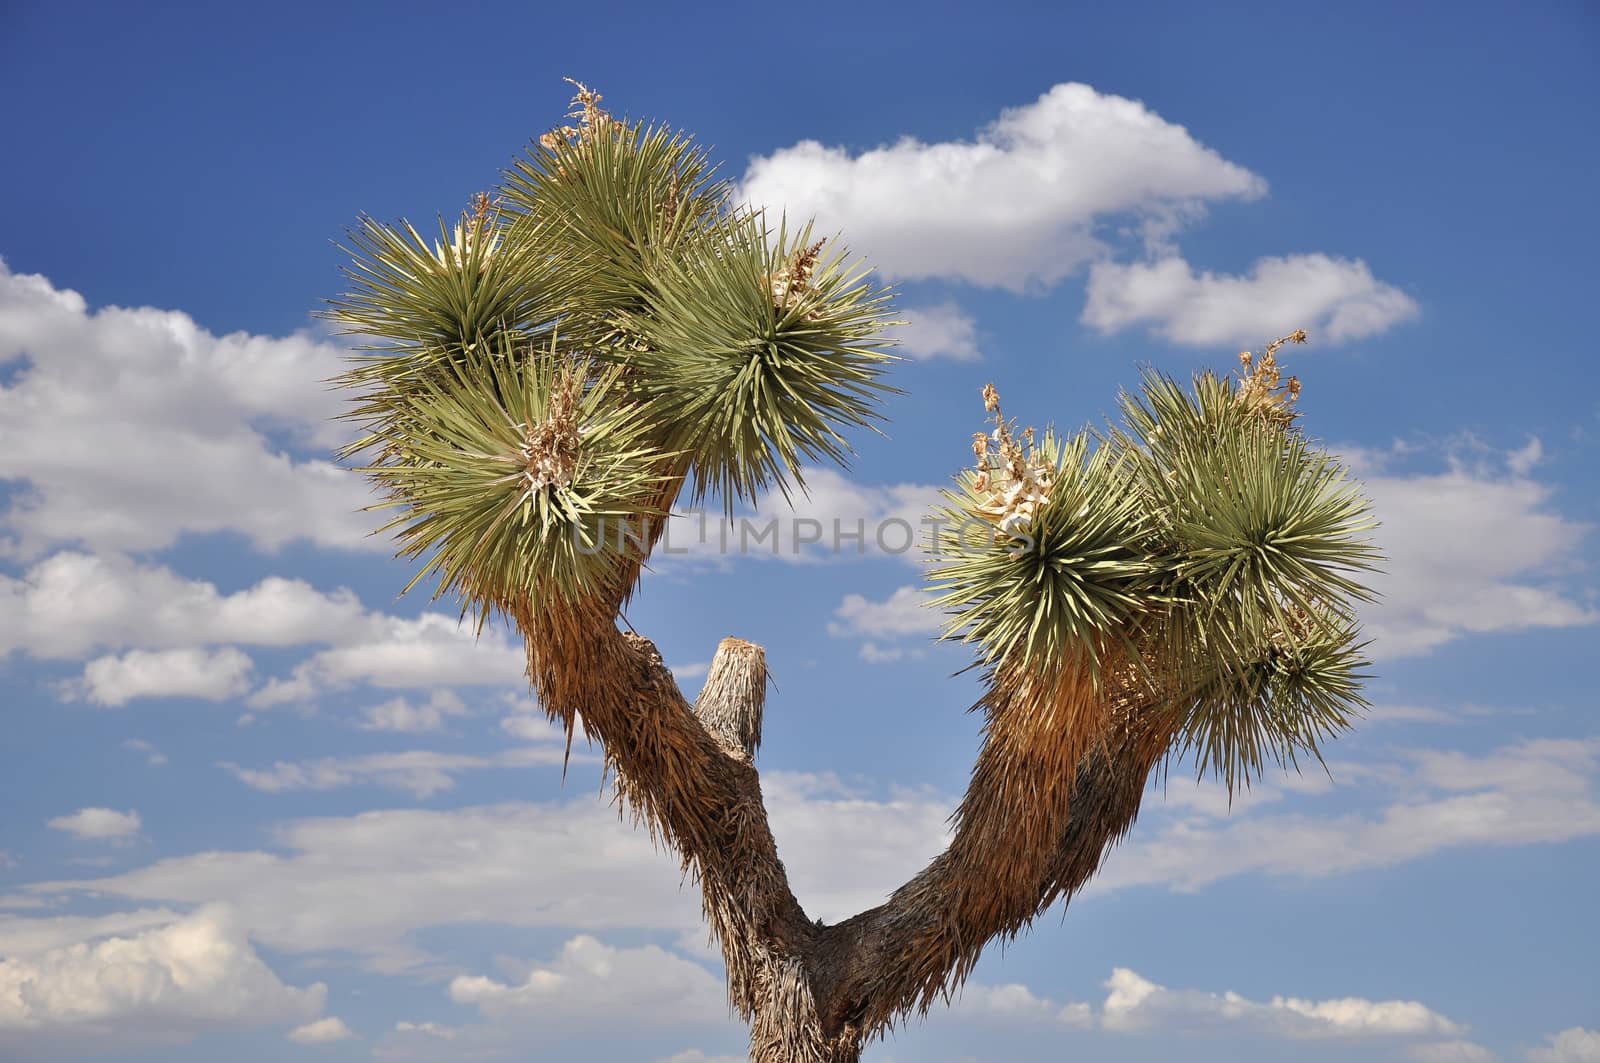 View of a Joshua Tree and a blue cloud-filled sky in southern California.